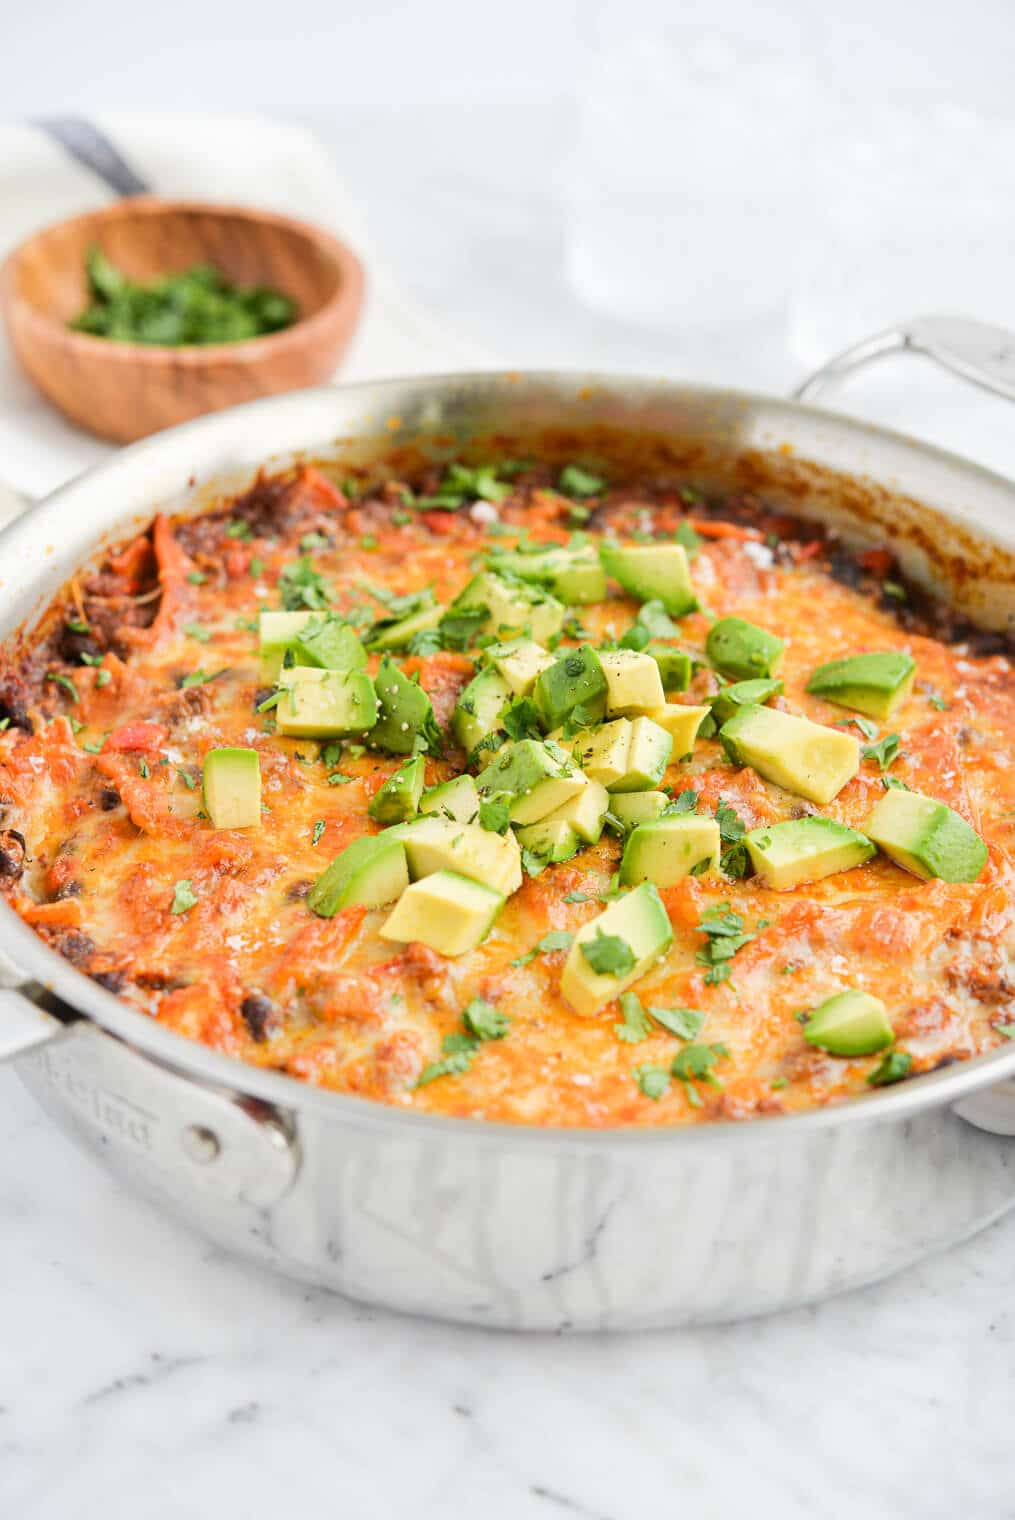 the side view of a skillet of ground beef enchilada casserole topped with diced avocado and cilantro sitting on a marble surface